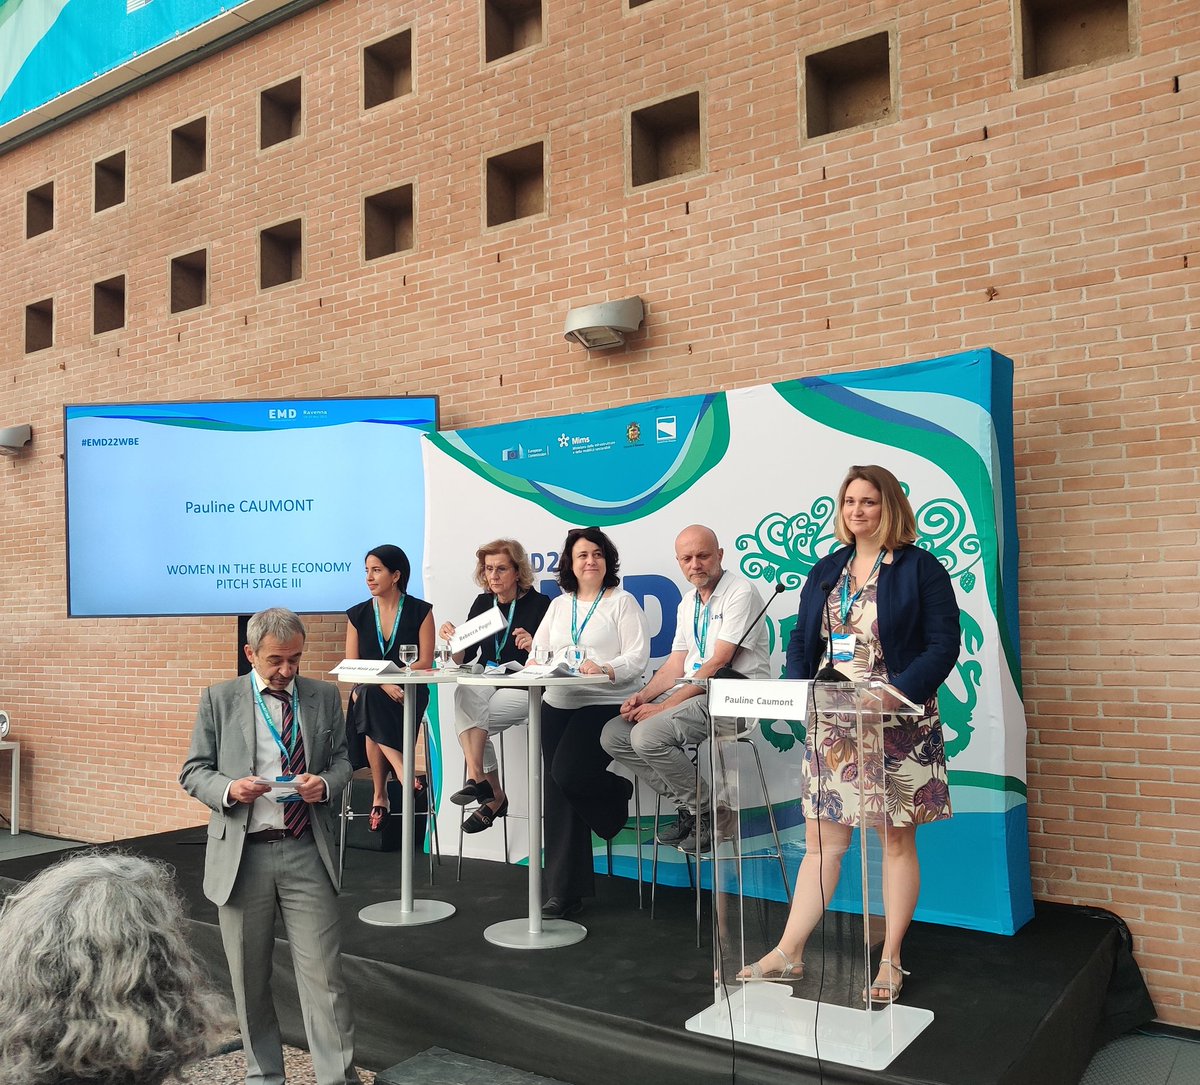 There are € 2.5 million to increase the participation of #WomenInTheBlueEconomy

Lots of interest from participants in the new #EMFAF Call for proposals at #EMD2022

Apply until 22/09 europa.eu/!6pPQw7